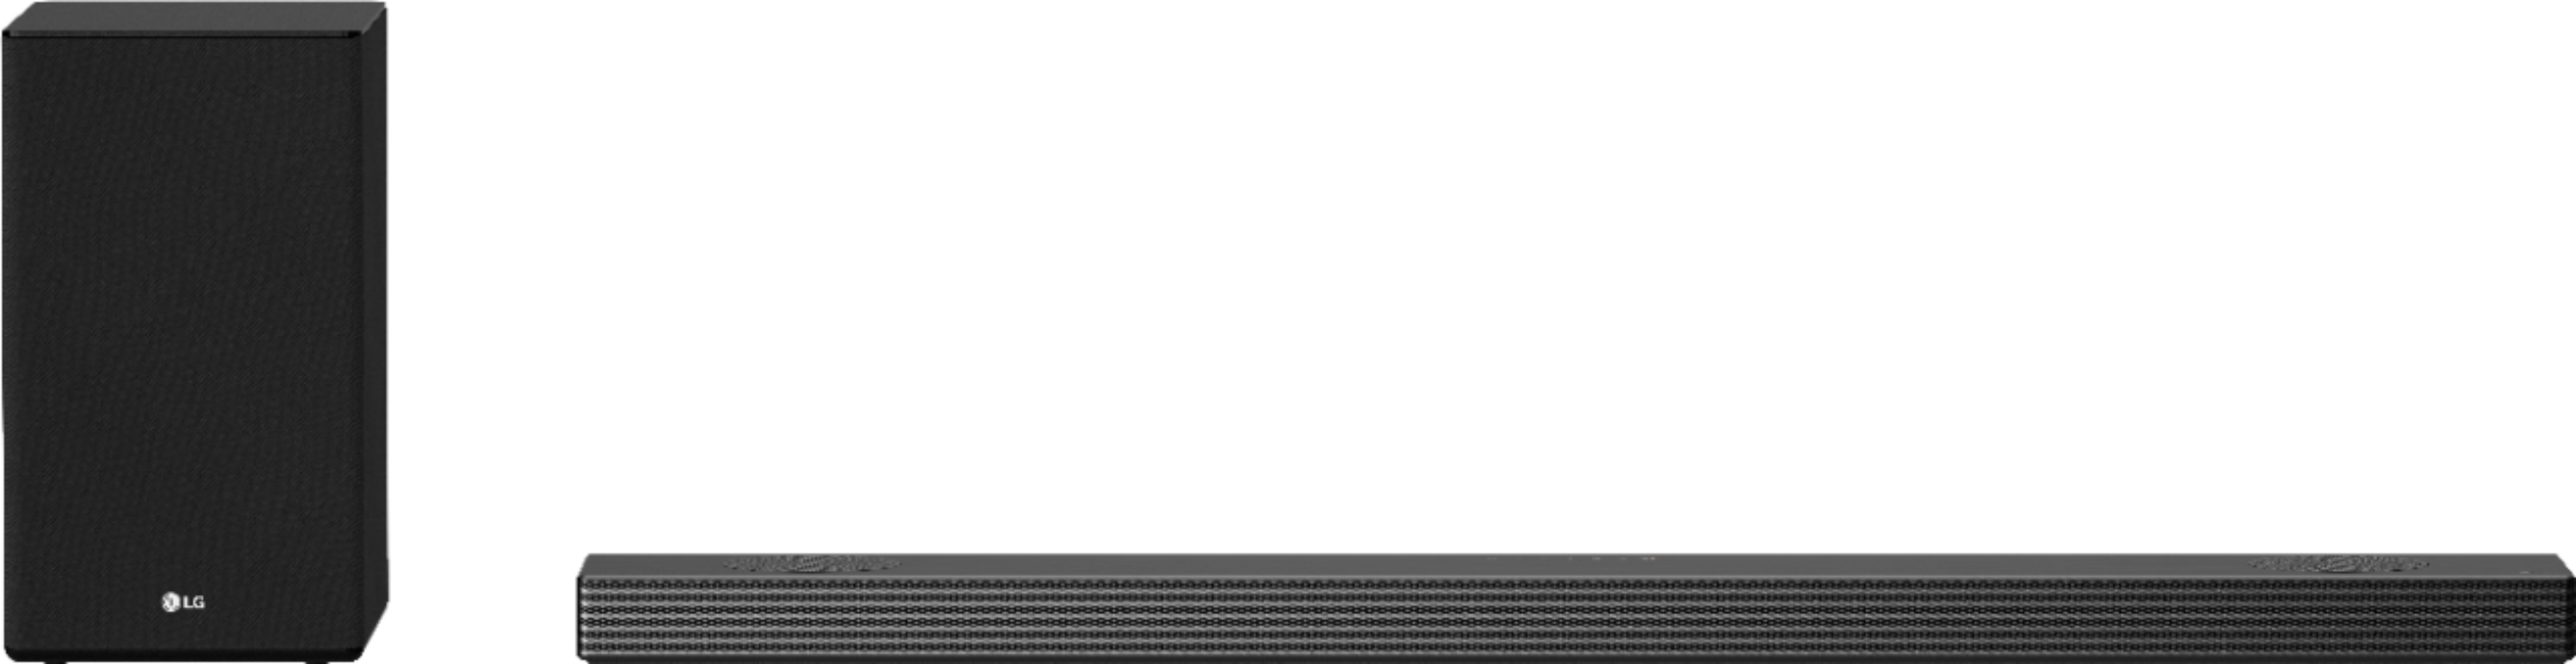 LG - 5.1.2-Channel 520W Soundbar System with Wireless Subwoofer and 4K & HDR Support and Dolby Atmos with Google Assistant - Black